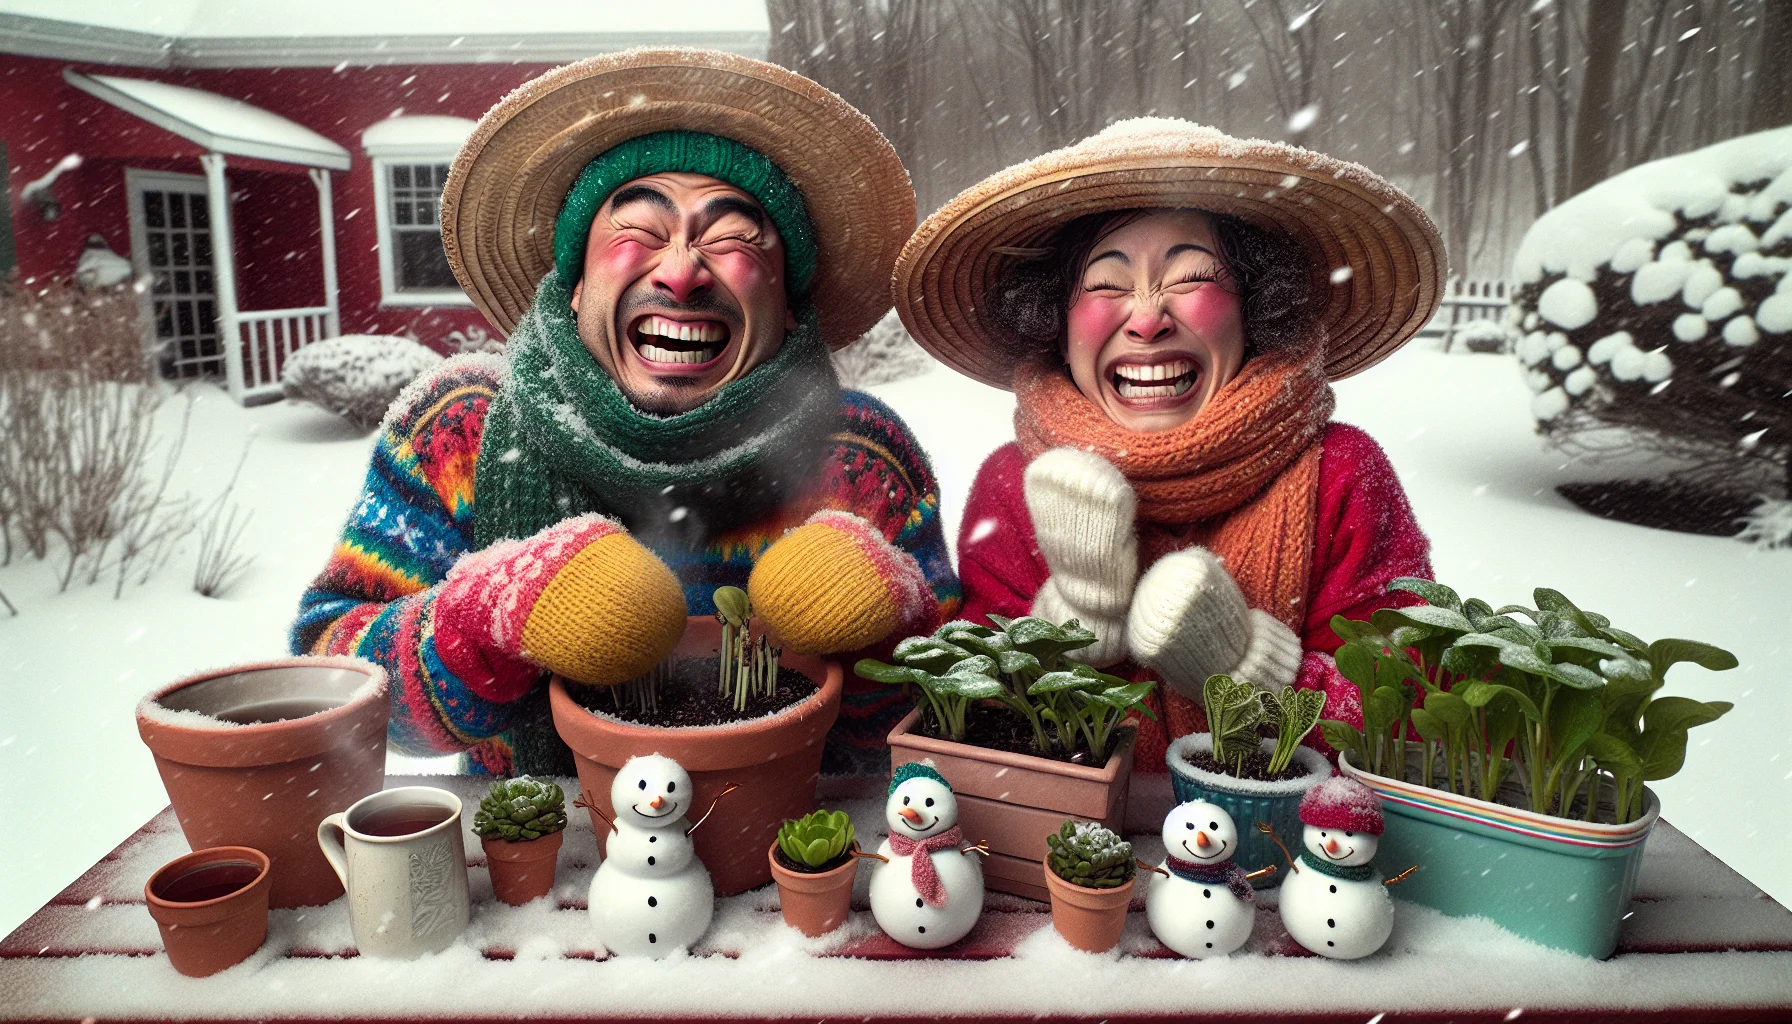 A humorous winter scene filled with container gardening taking place on a snowy day. A South Asian man and a Hispanic woman are giggling while wearing colourful winter outfits, over-sized mittens on their hands and wide-brimmed straw hats to shield their eyes from the falling snow. Their cheeks are flushed from the cold and they're messing about, planting winter greens in frost-resistant pots with tiny snowmen ornaments beside them. The garden is alive with hardy winter blooms and their hot tea steams up from the table nearby, evoking the warmth of summer amid the chilling winter scenes.